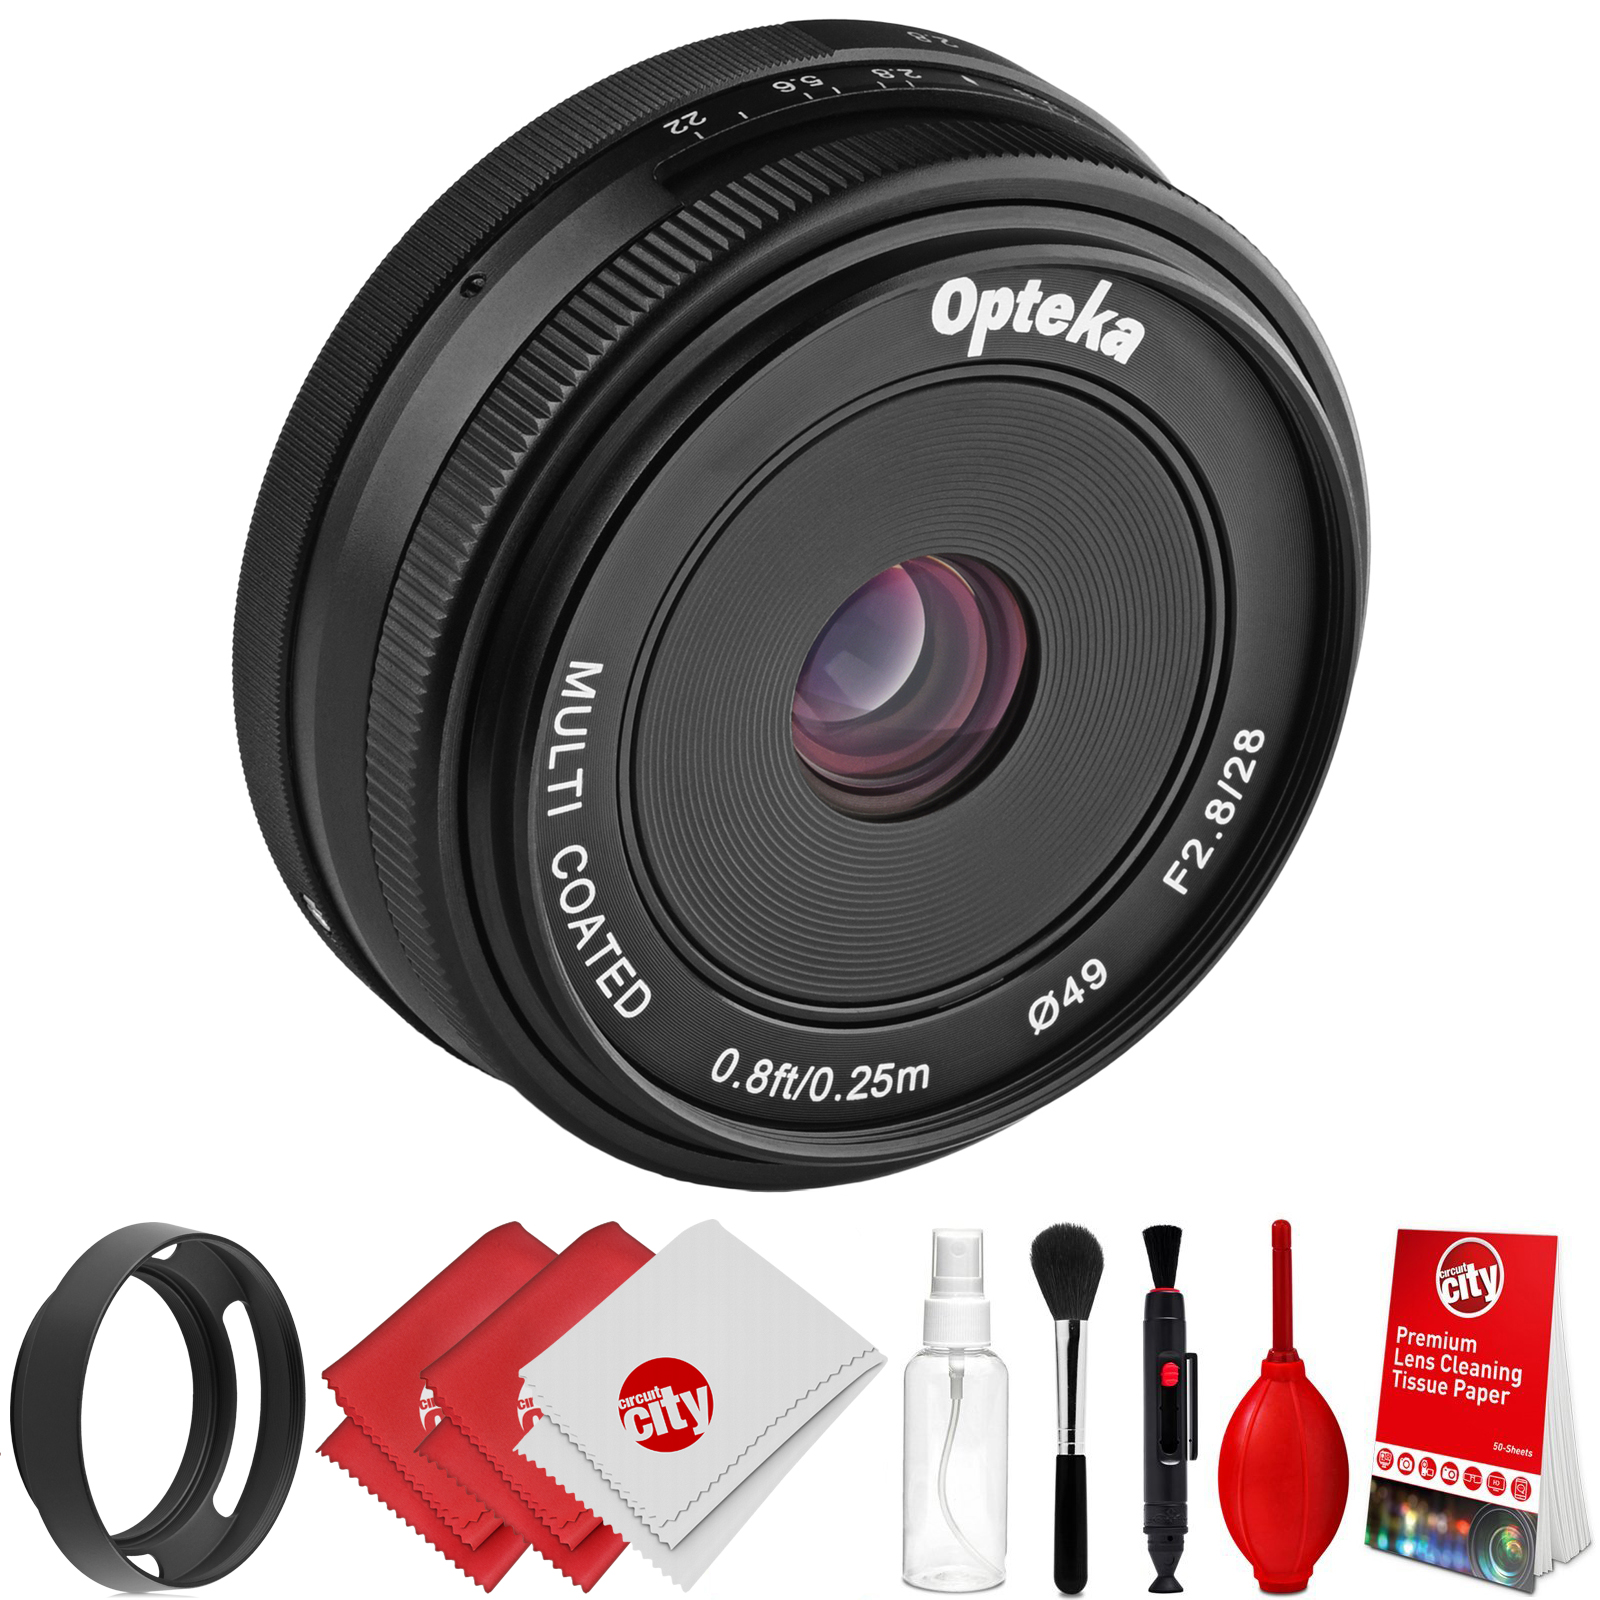 Opteka 28mm f/2.8 HD MC Manual Focus Prime Lens with Vented Hood and Cleaning Kit for Panasonic Micro 4/3 Mount Digital Cameras